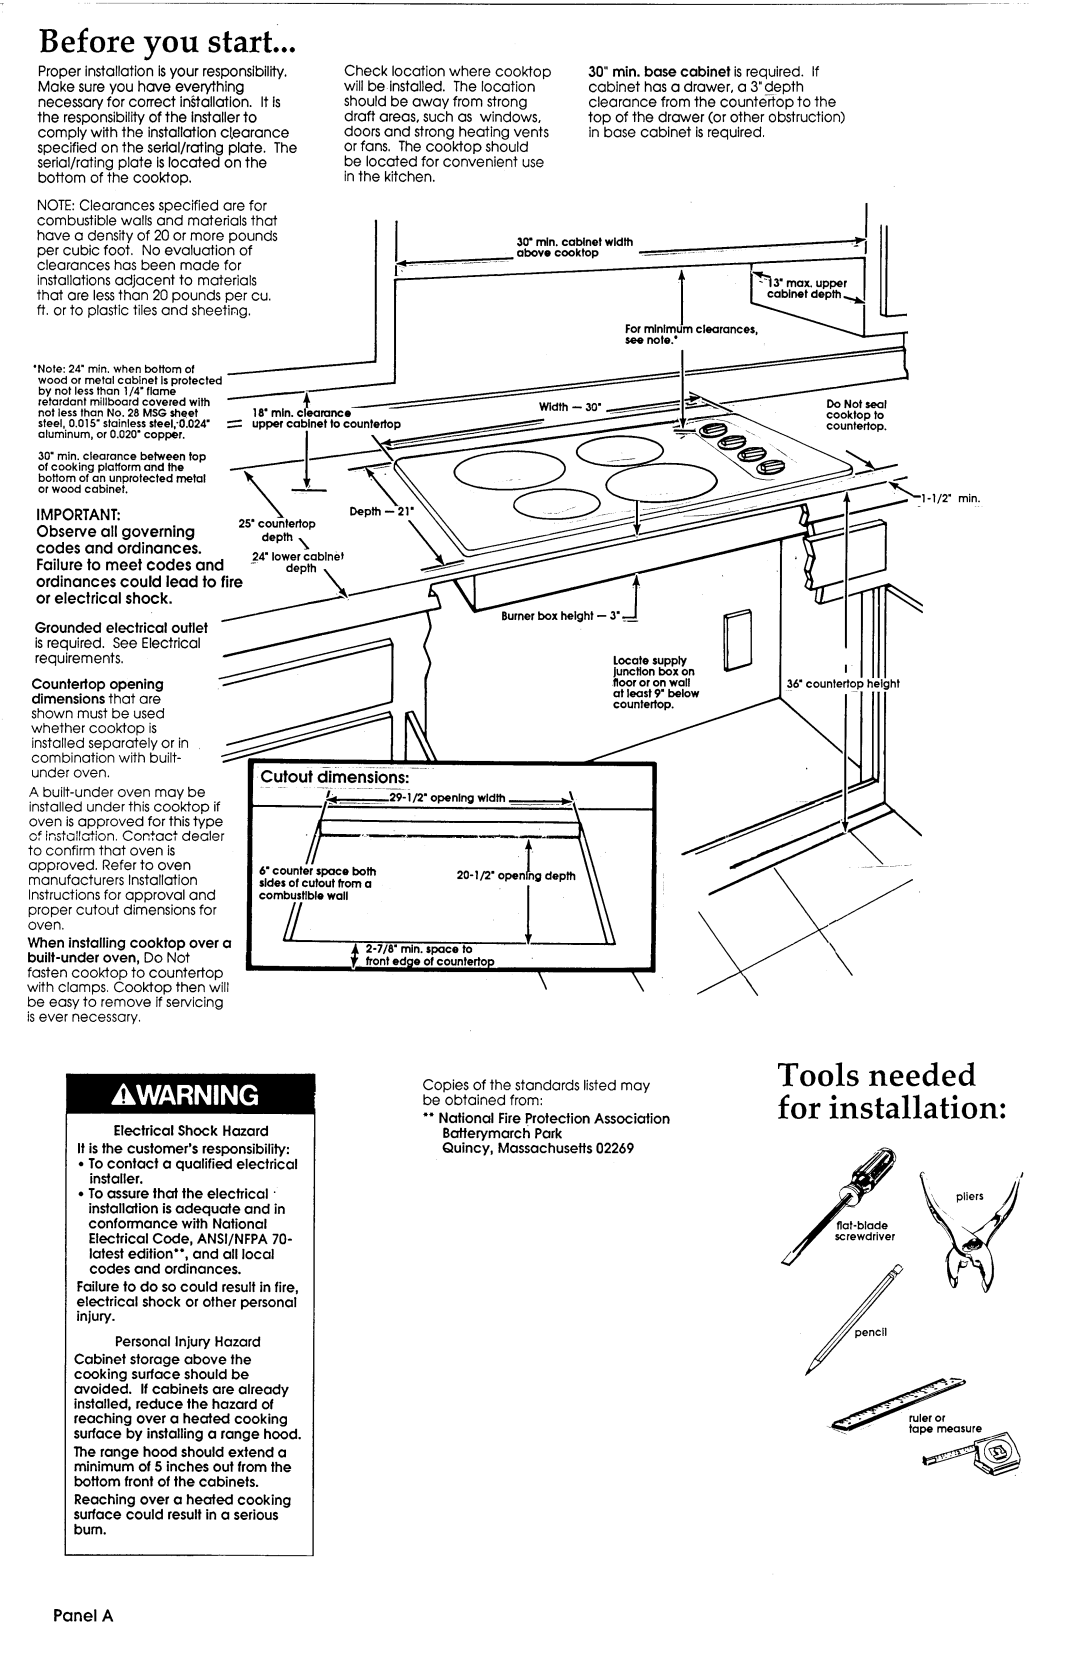 Whirlpool Cooktop installation instructions Before you start, Cutout, dimensions, Panel A, depth l, ~~~~~~~~er~xheight-3*~ 